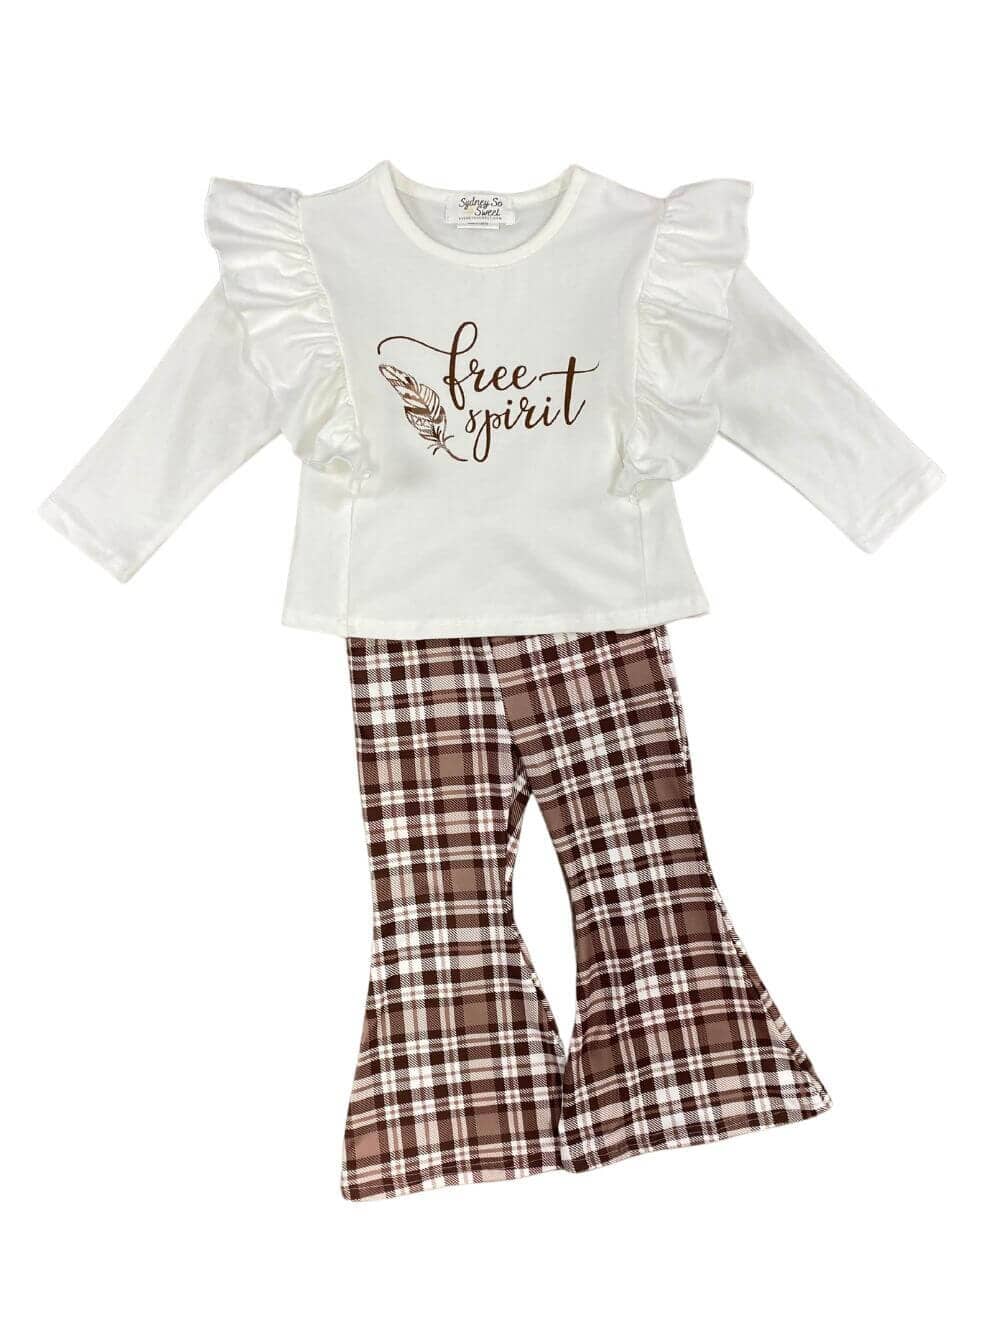 Free Spirit Brown Plaid Flare Pants Girls Outfit